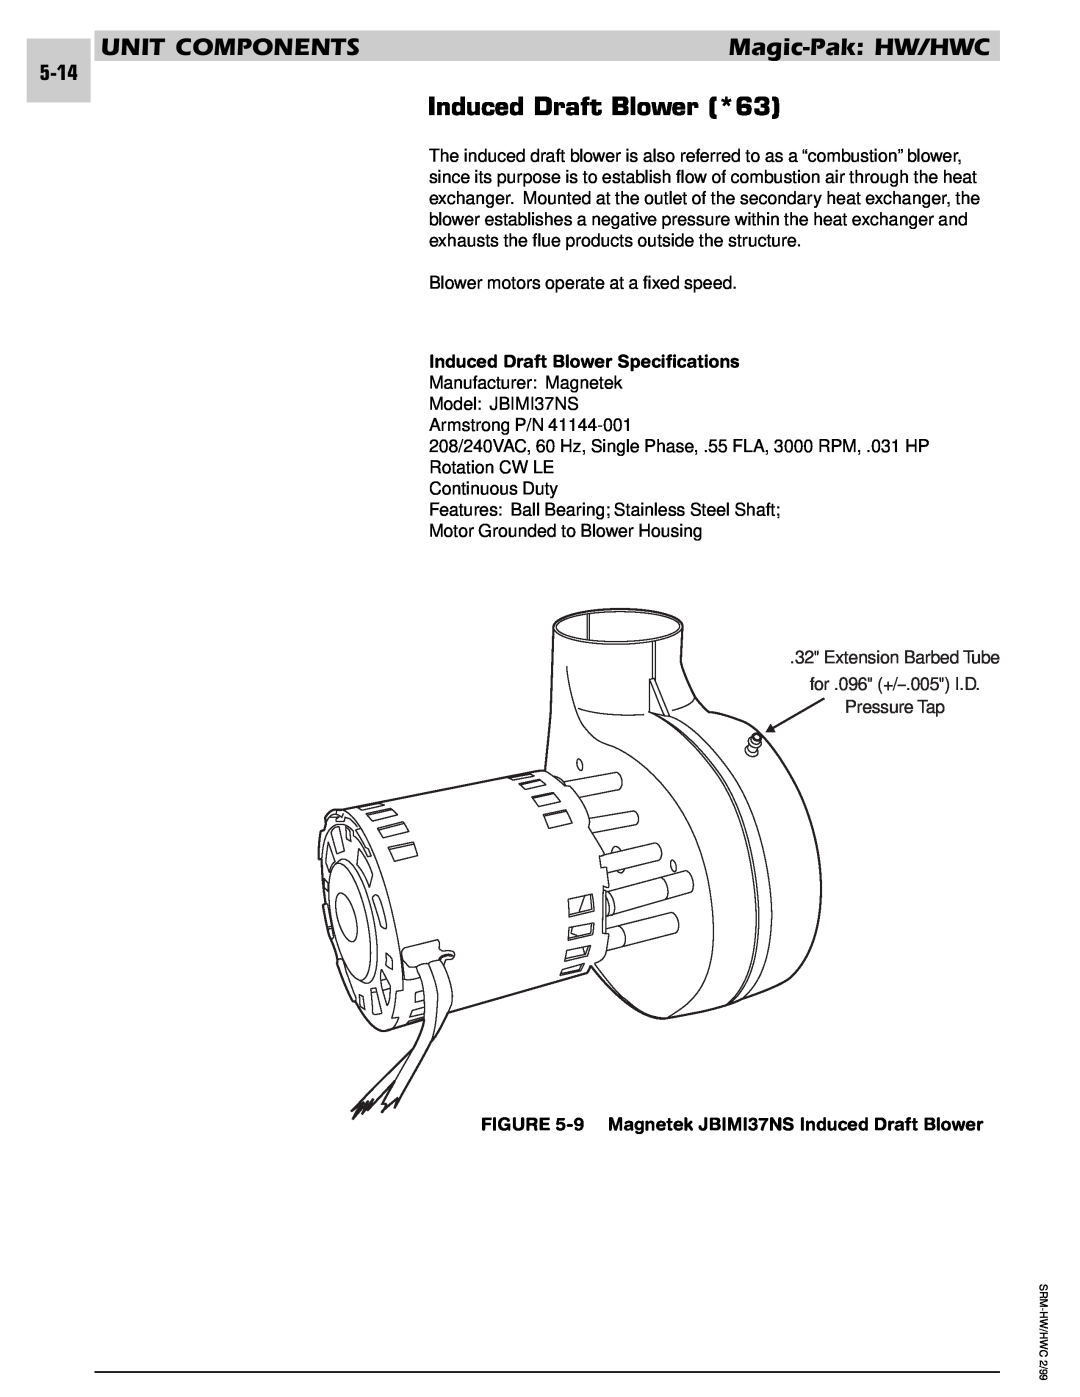 Armstrong World Industries 203, 243, 302, 242 Induced Draft Blower Specifications, 9 Magnetek JBIMI37NS Induced Draft Blower 